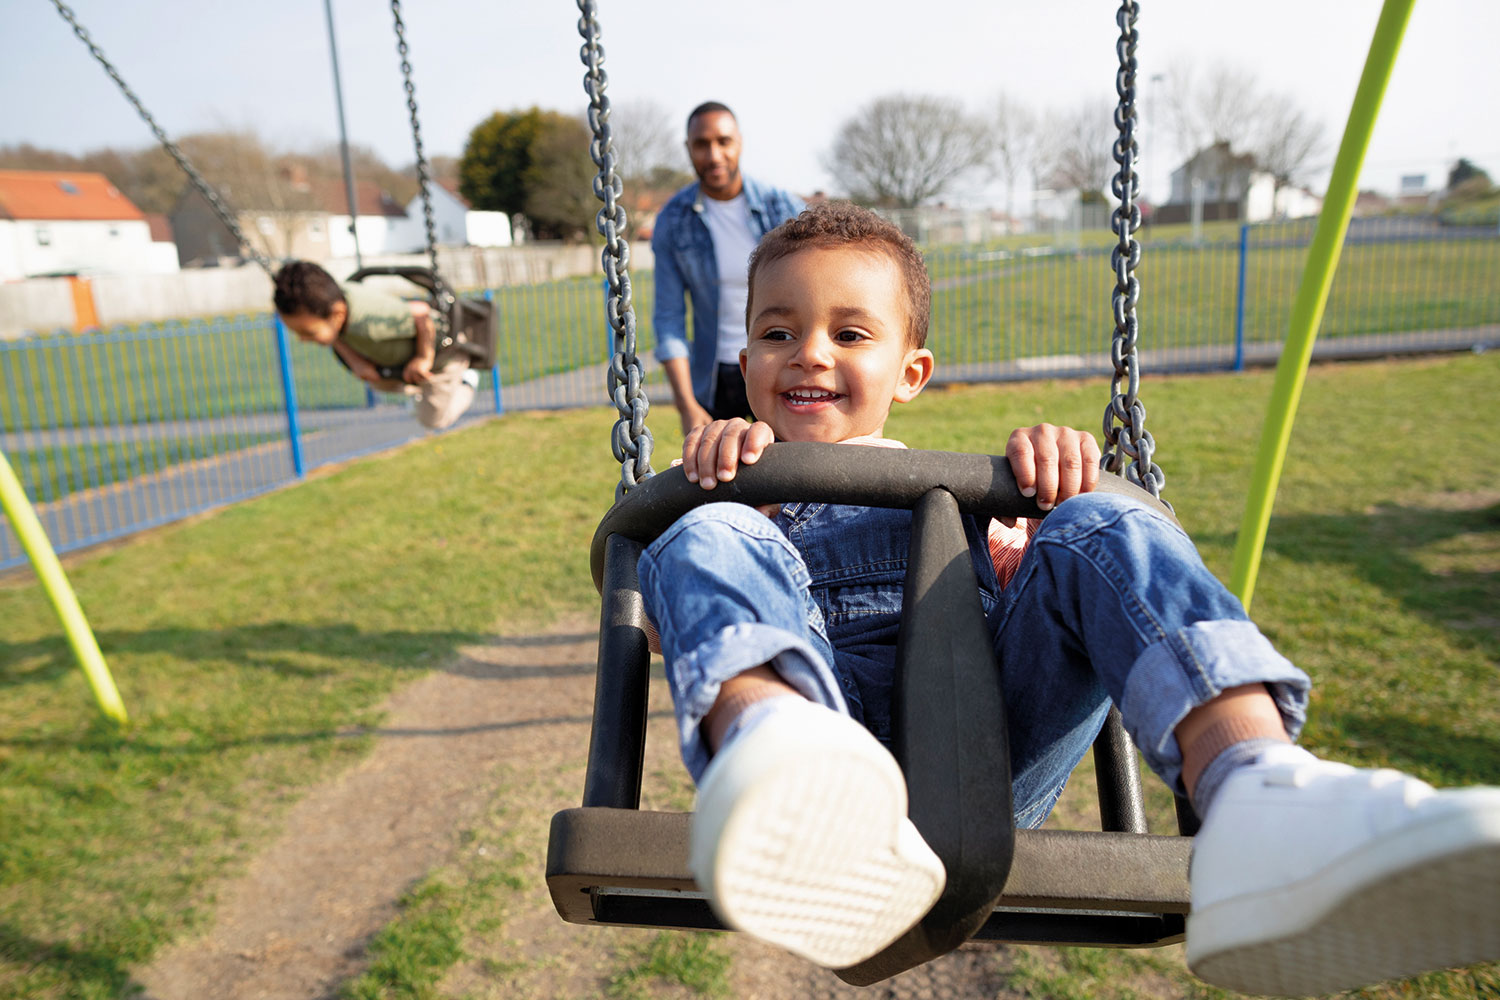 photo of smiling pre-school boy being pushed in a swing in an outdoor playground by his father who is in the background